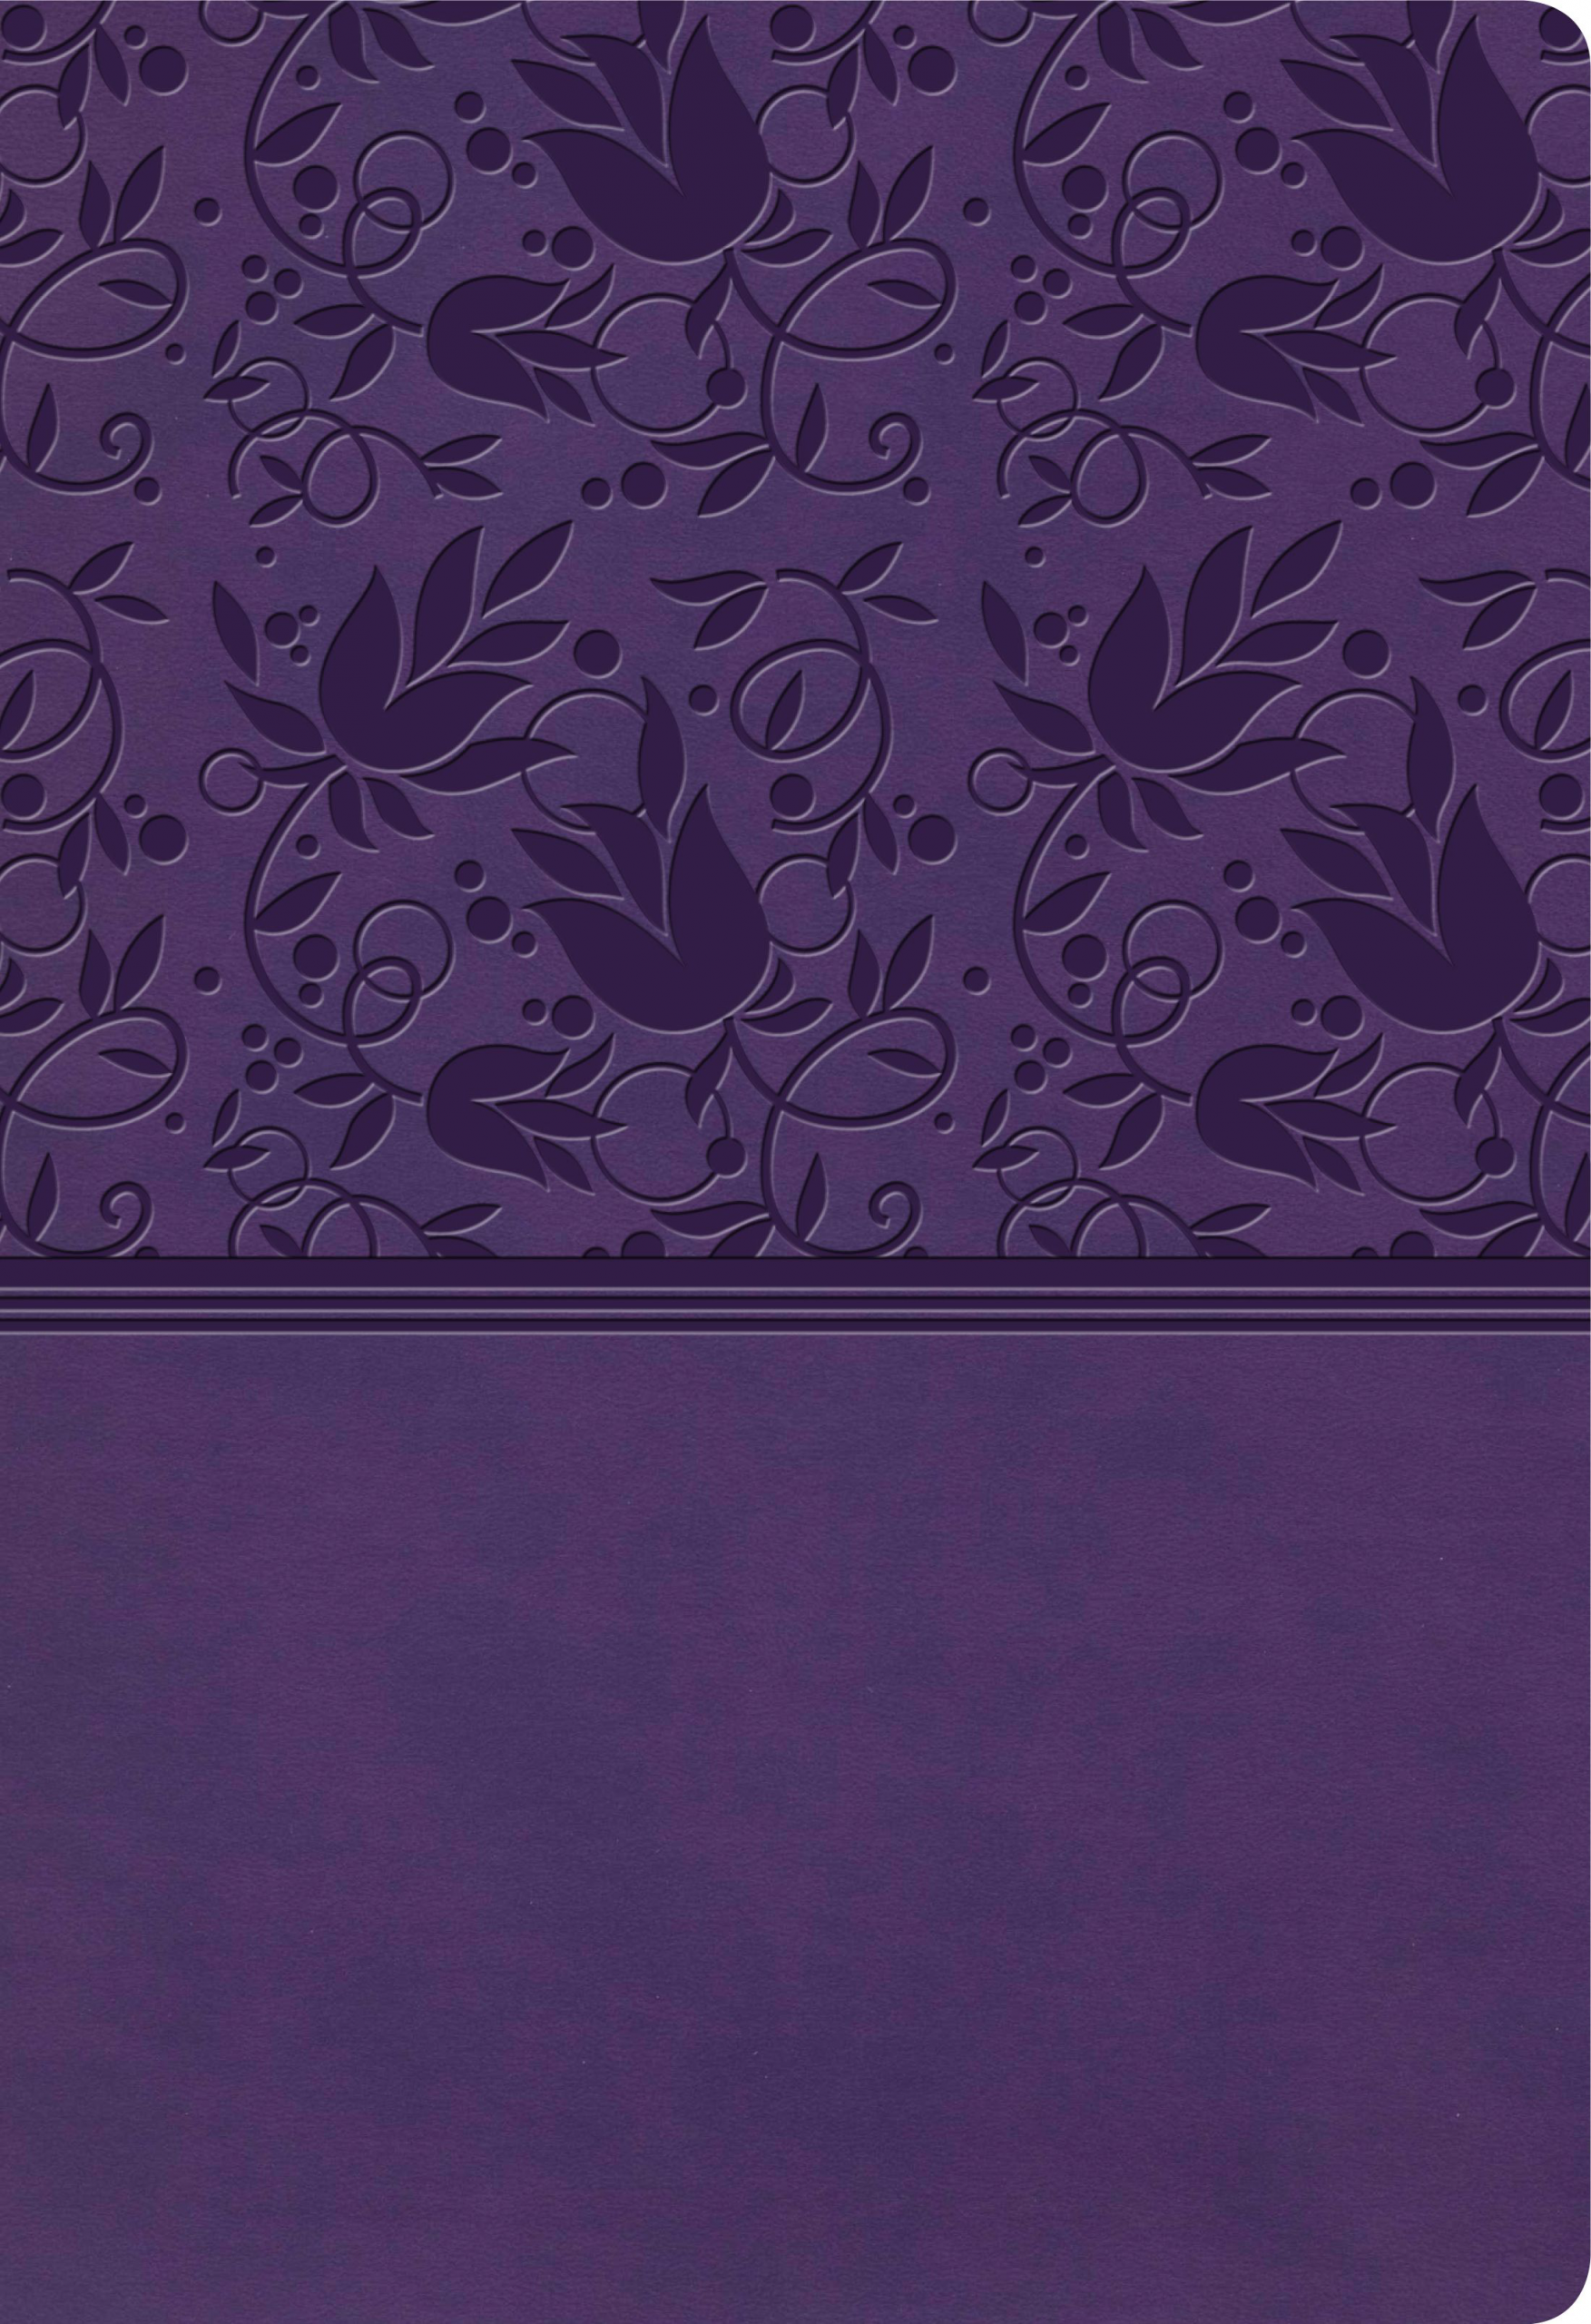 KJV Super Giant Print Reference Bible, Purple LeatherTouch, Indexed